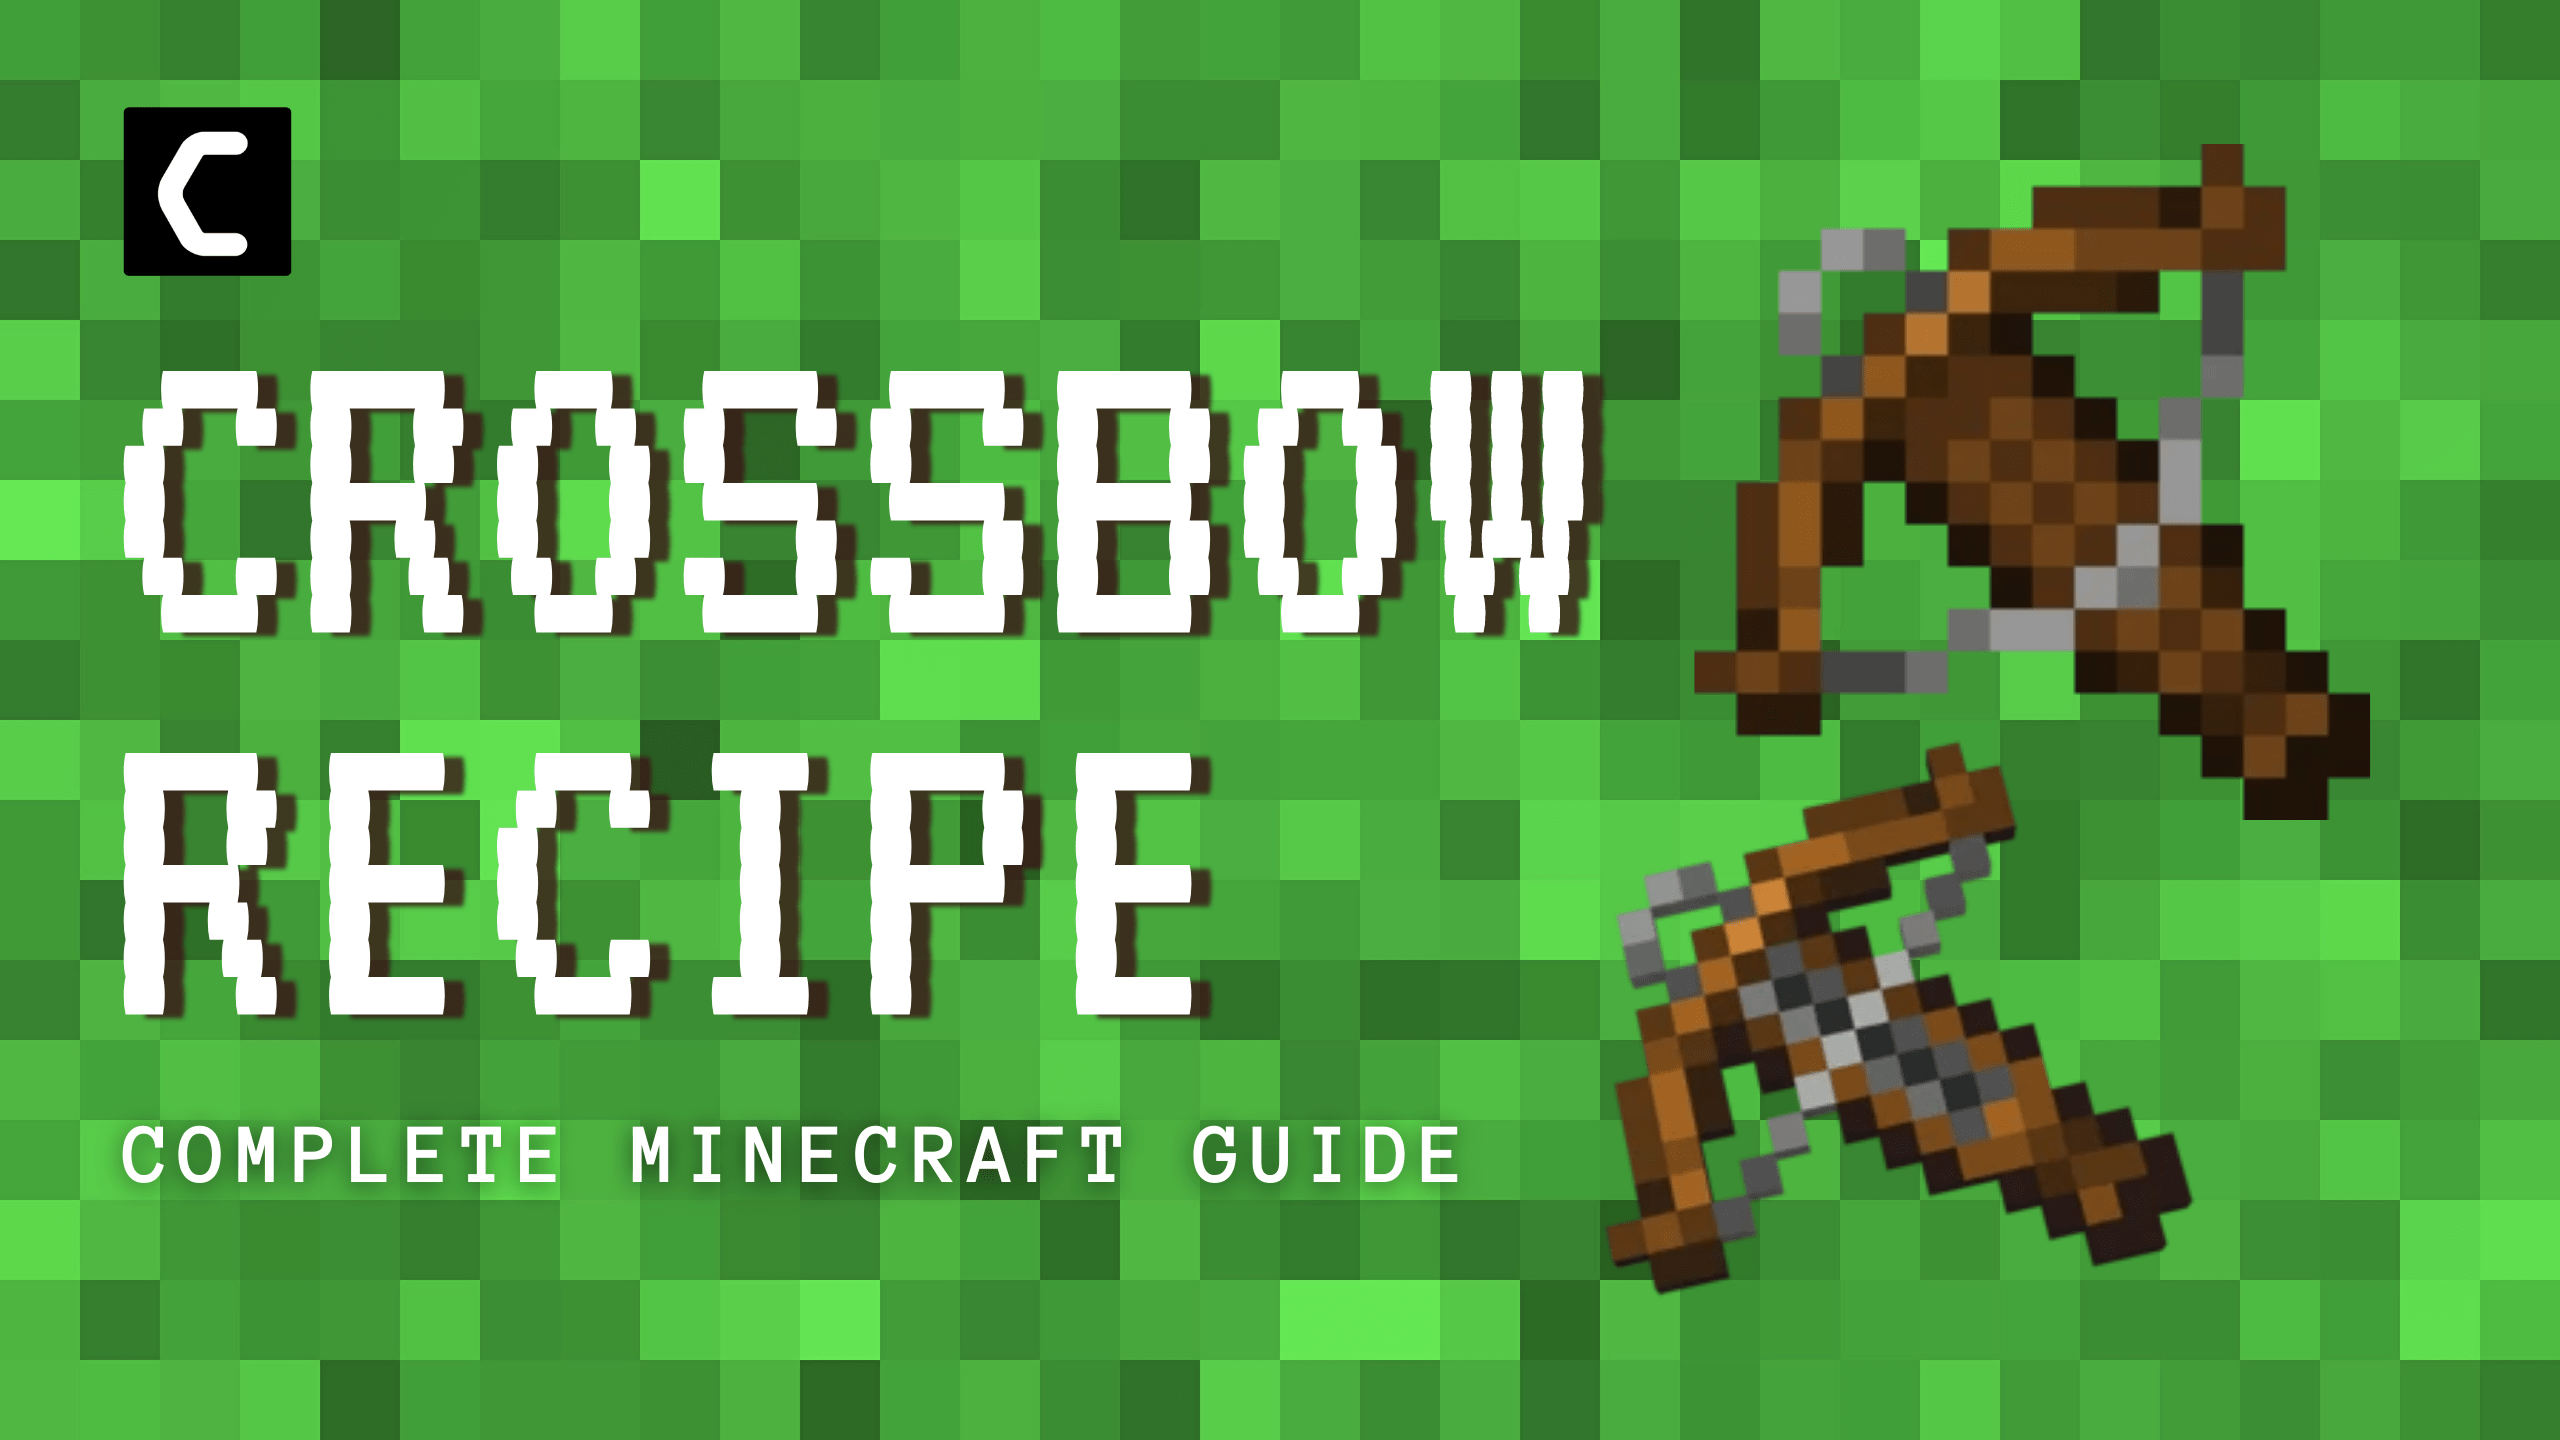 How to Make Crossbow in Minecraft